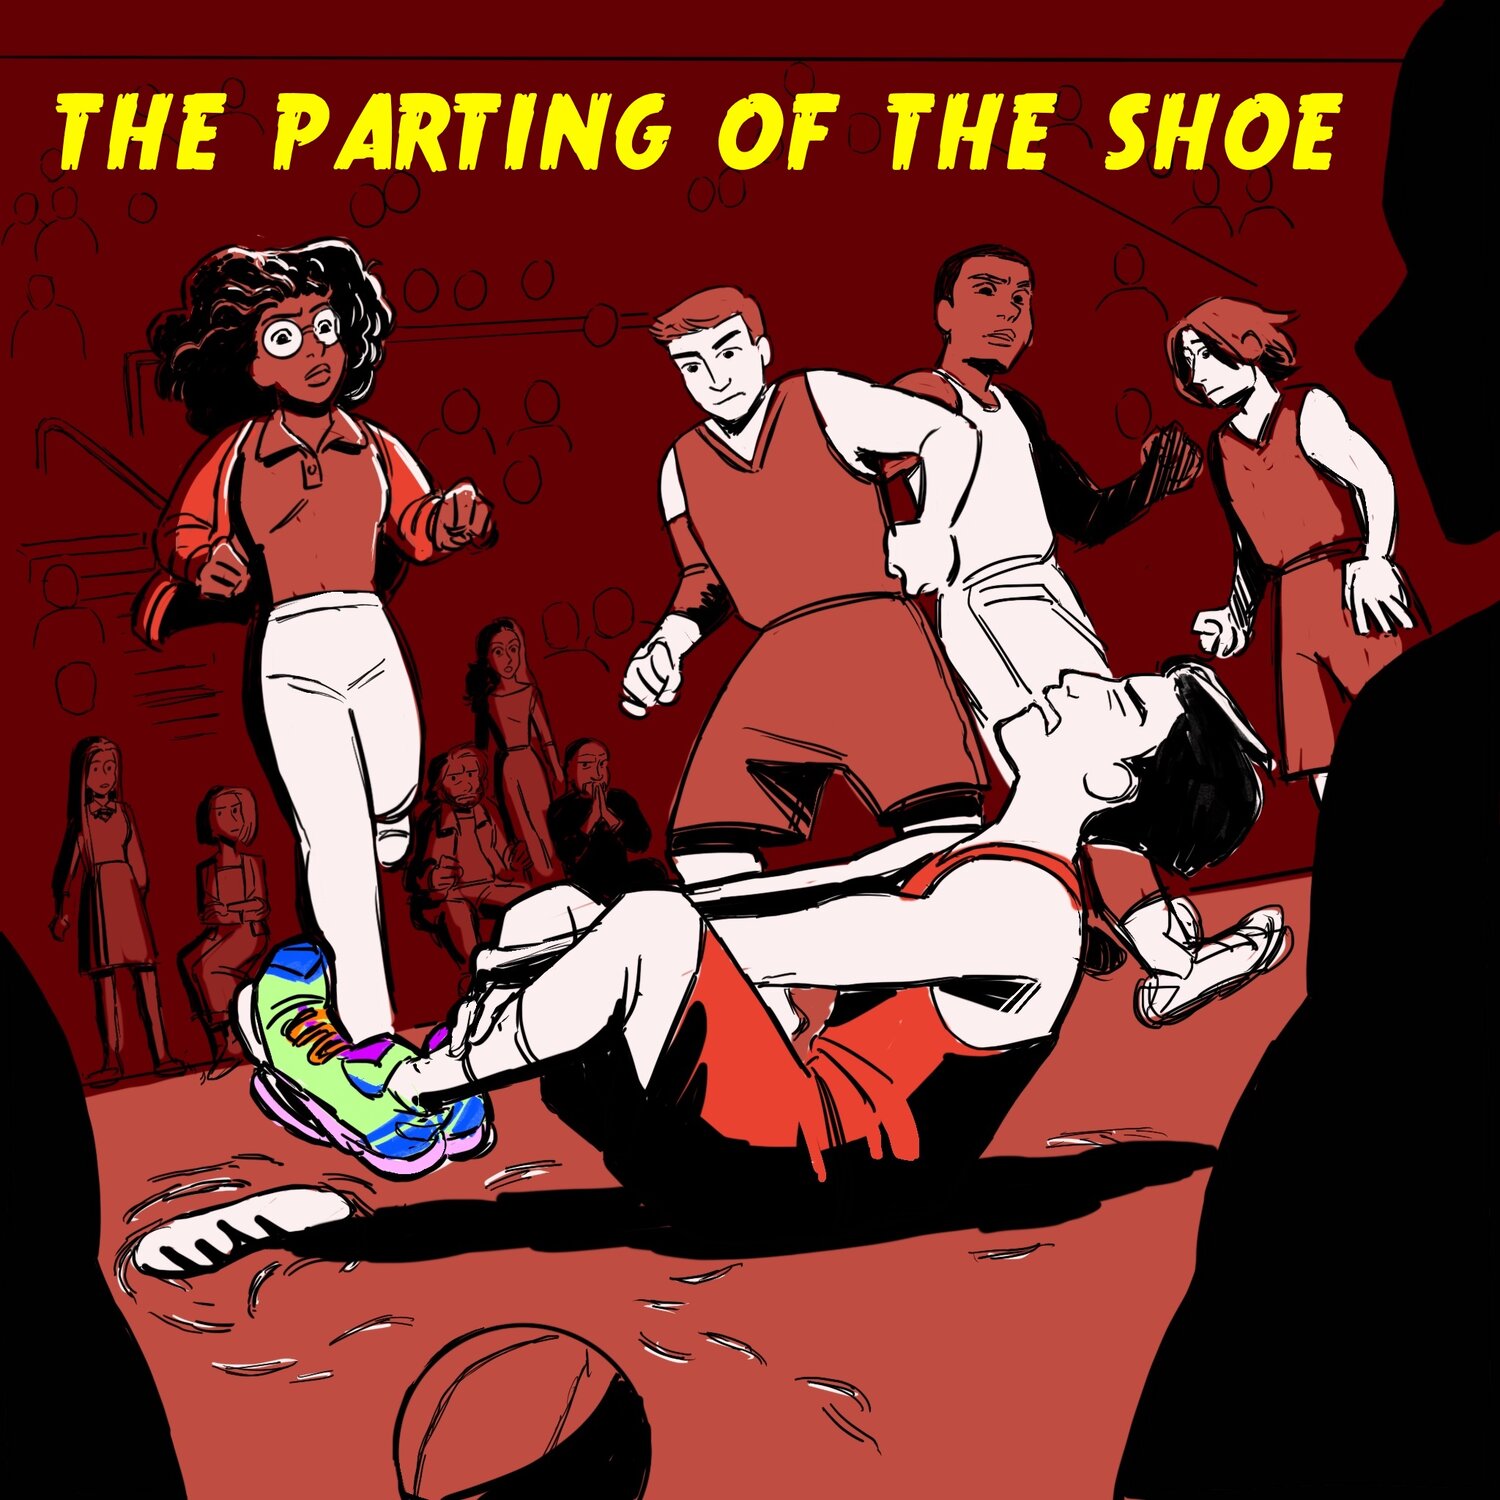 The Parting of the Shoe